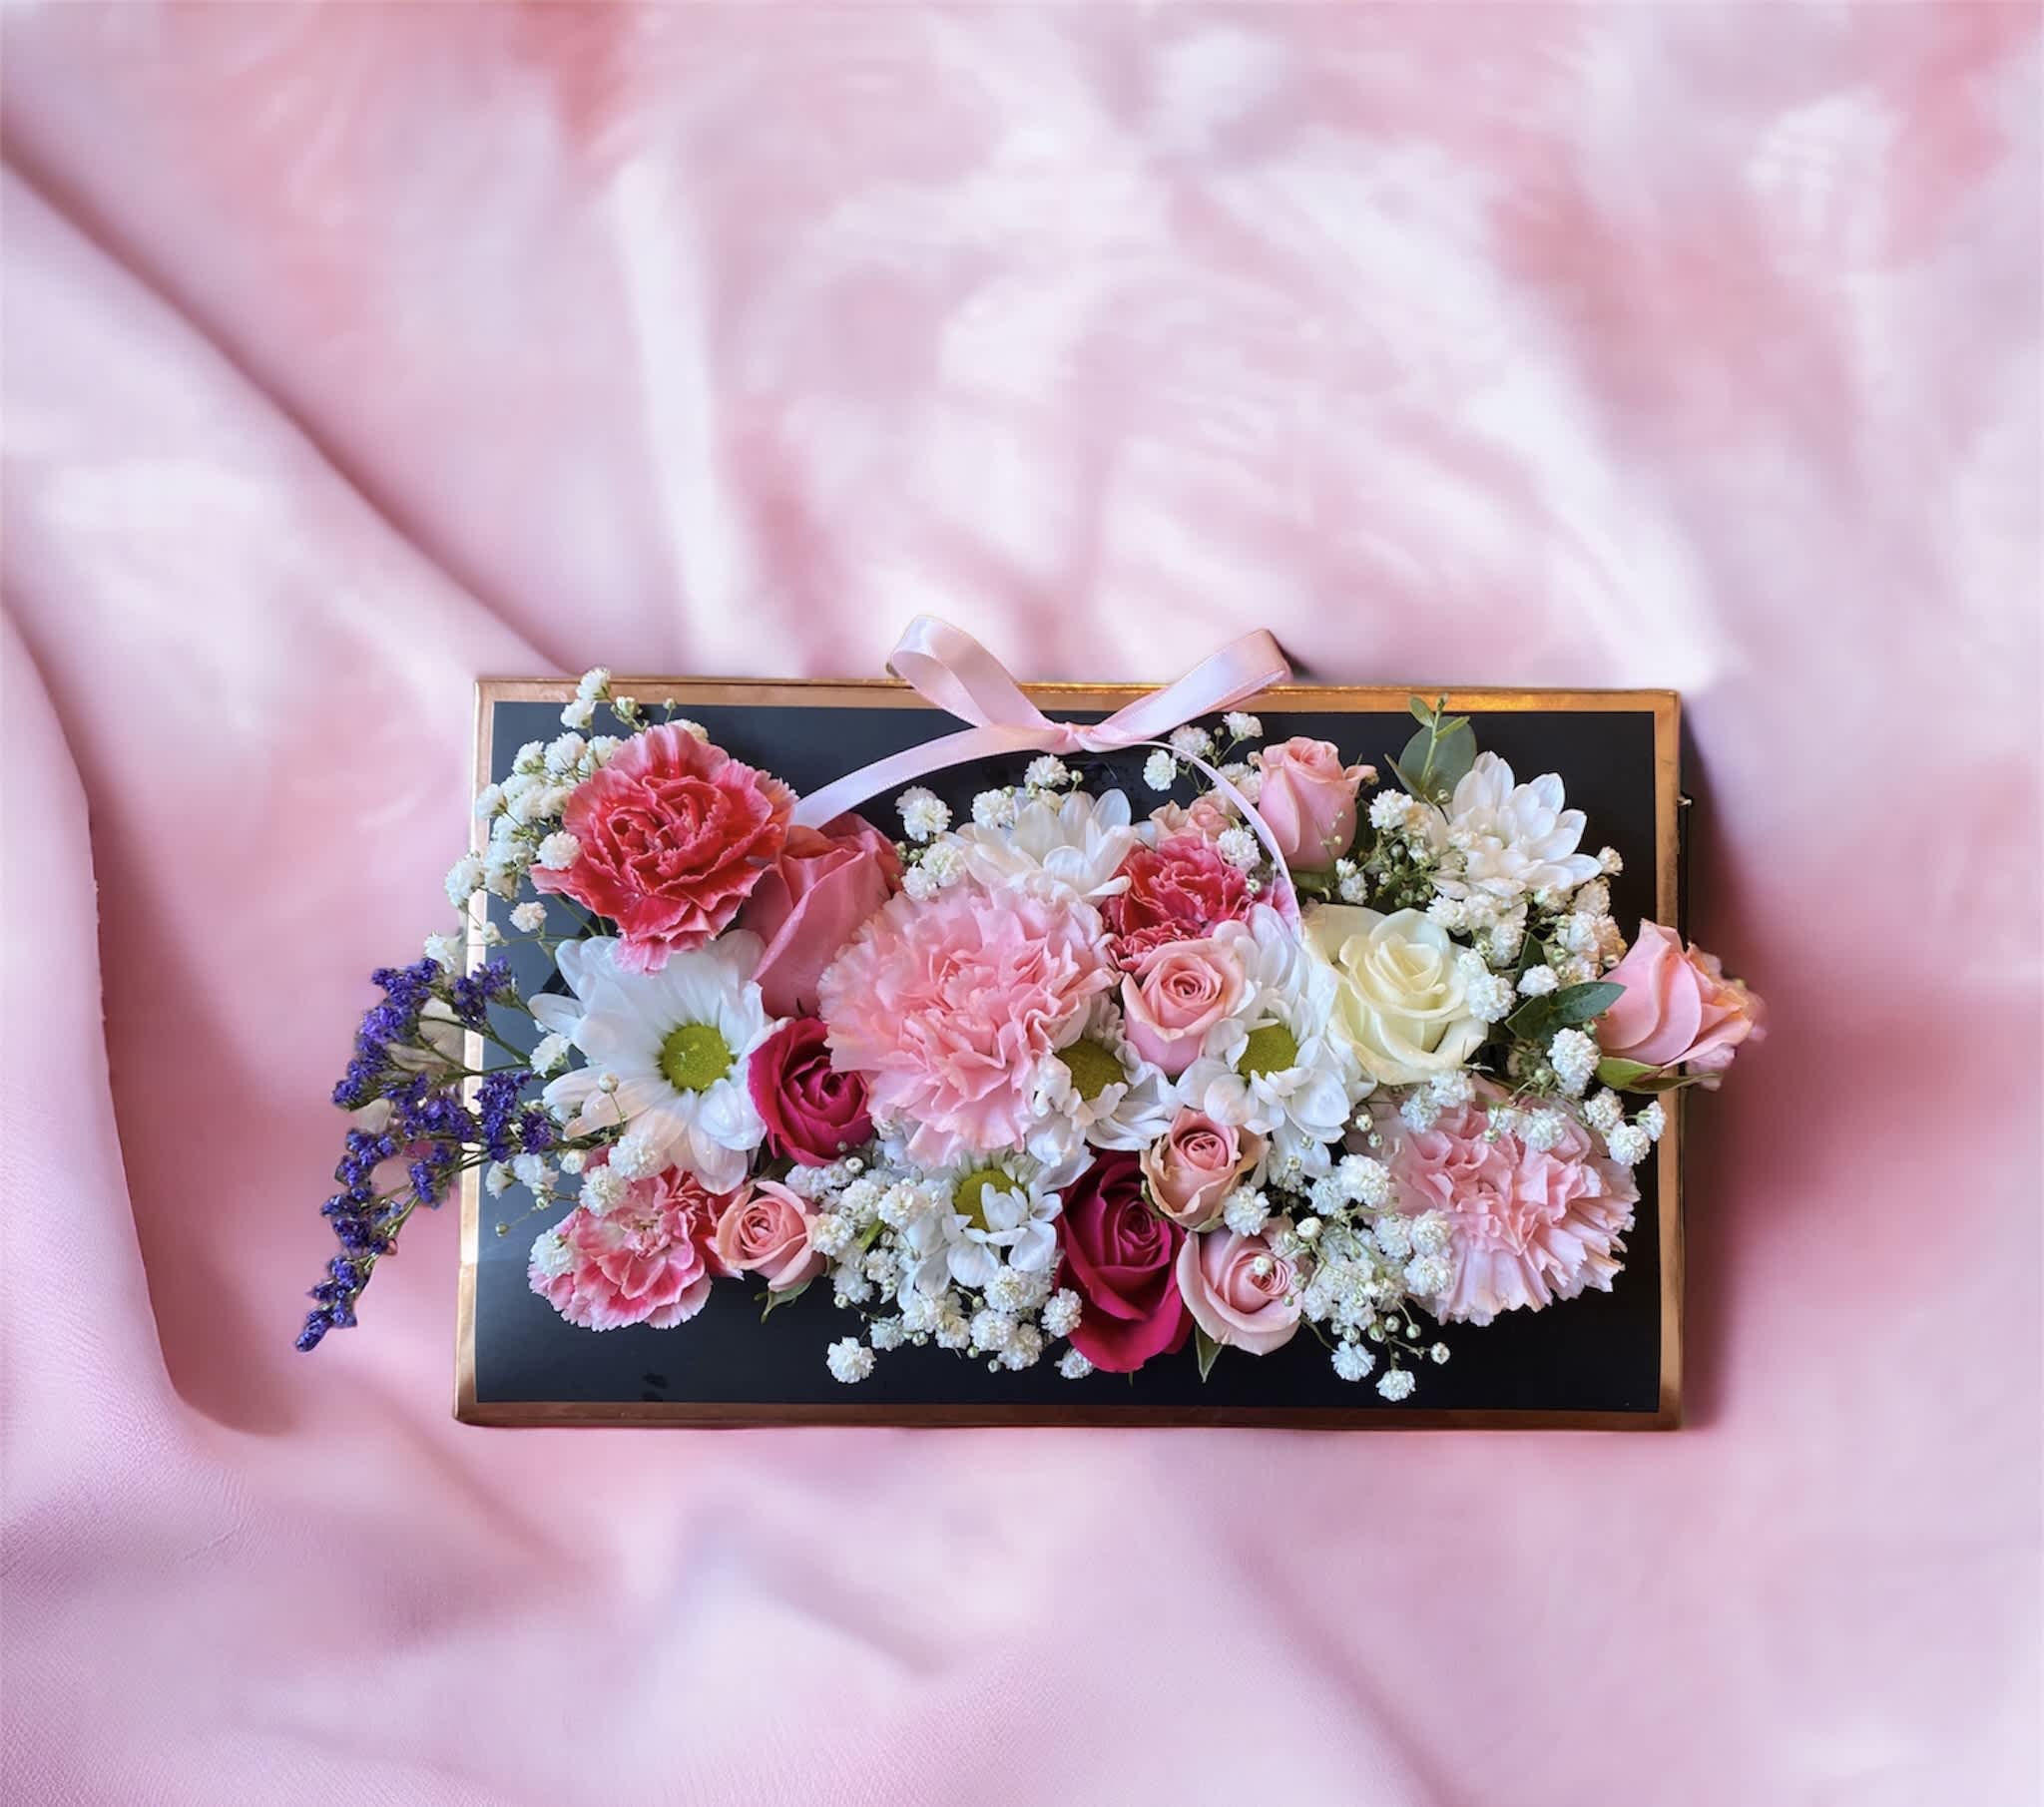  Pinky - Everyone's crushing on this precious Valentine's Day gift! Bursting with classic pink blooms, this unique and elegant arrangement is sure to make her heart flutter. Ribbon is subject to substitution based on available inventory.